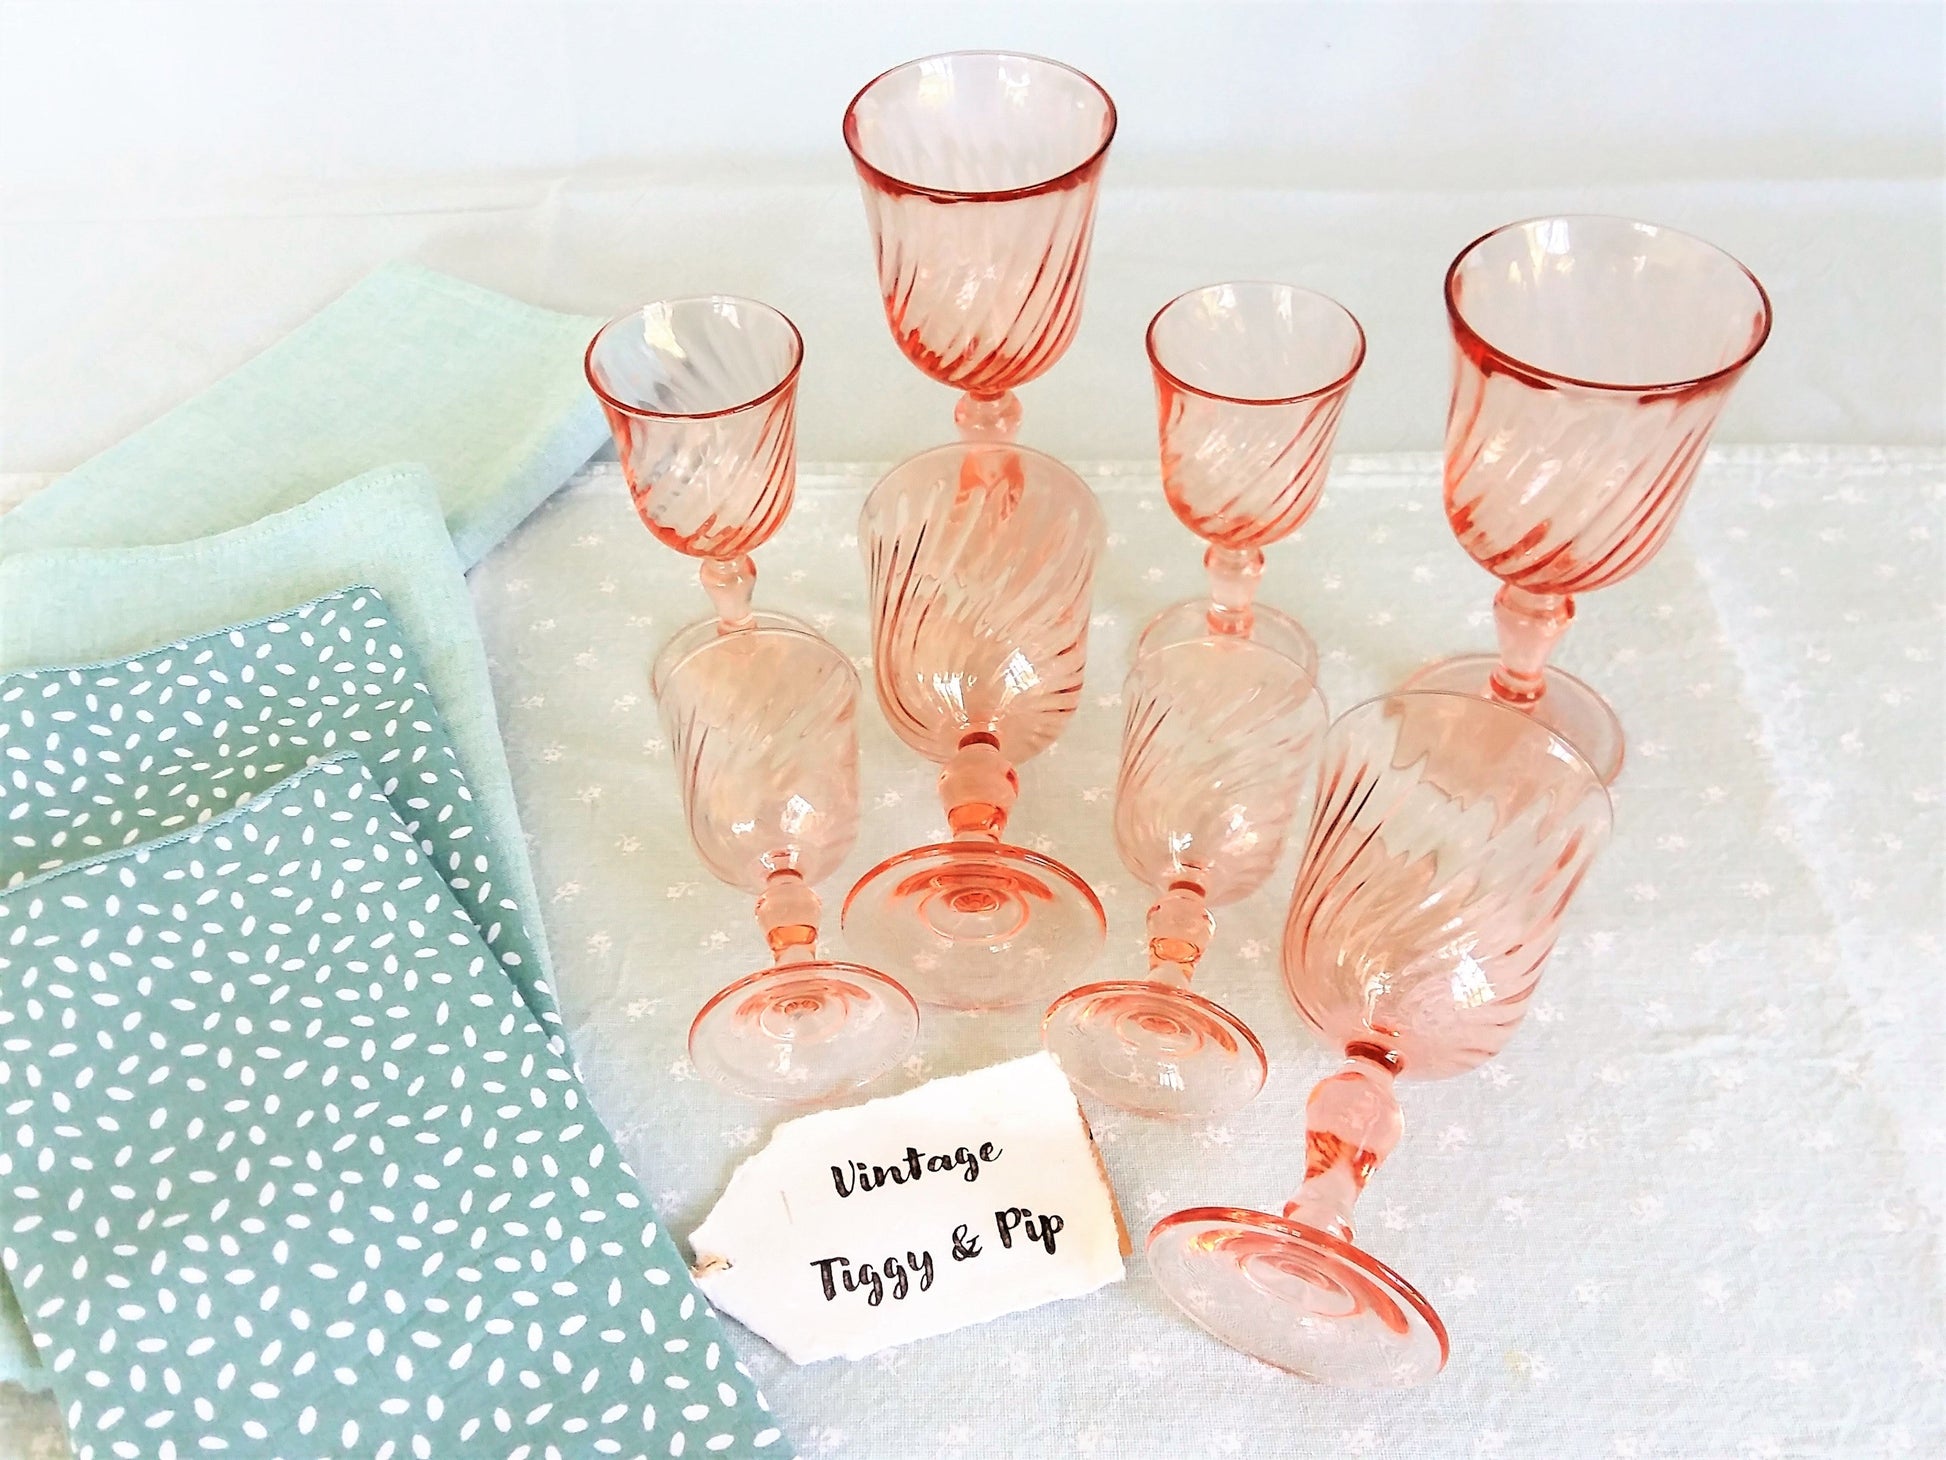 6 Small French Wine Glasses, Pink Swirl Glasses, Pedestal Footed French  Wine Glasses, Retro Drinksware Gift for New Home 